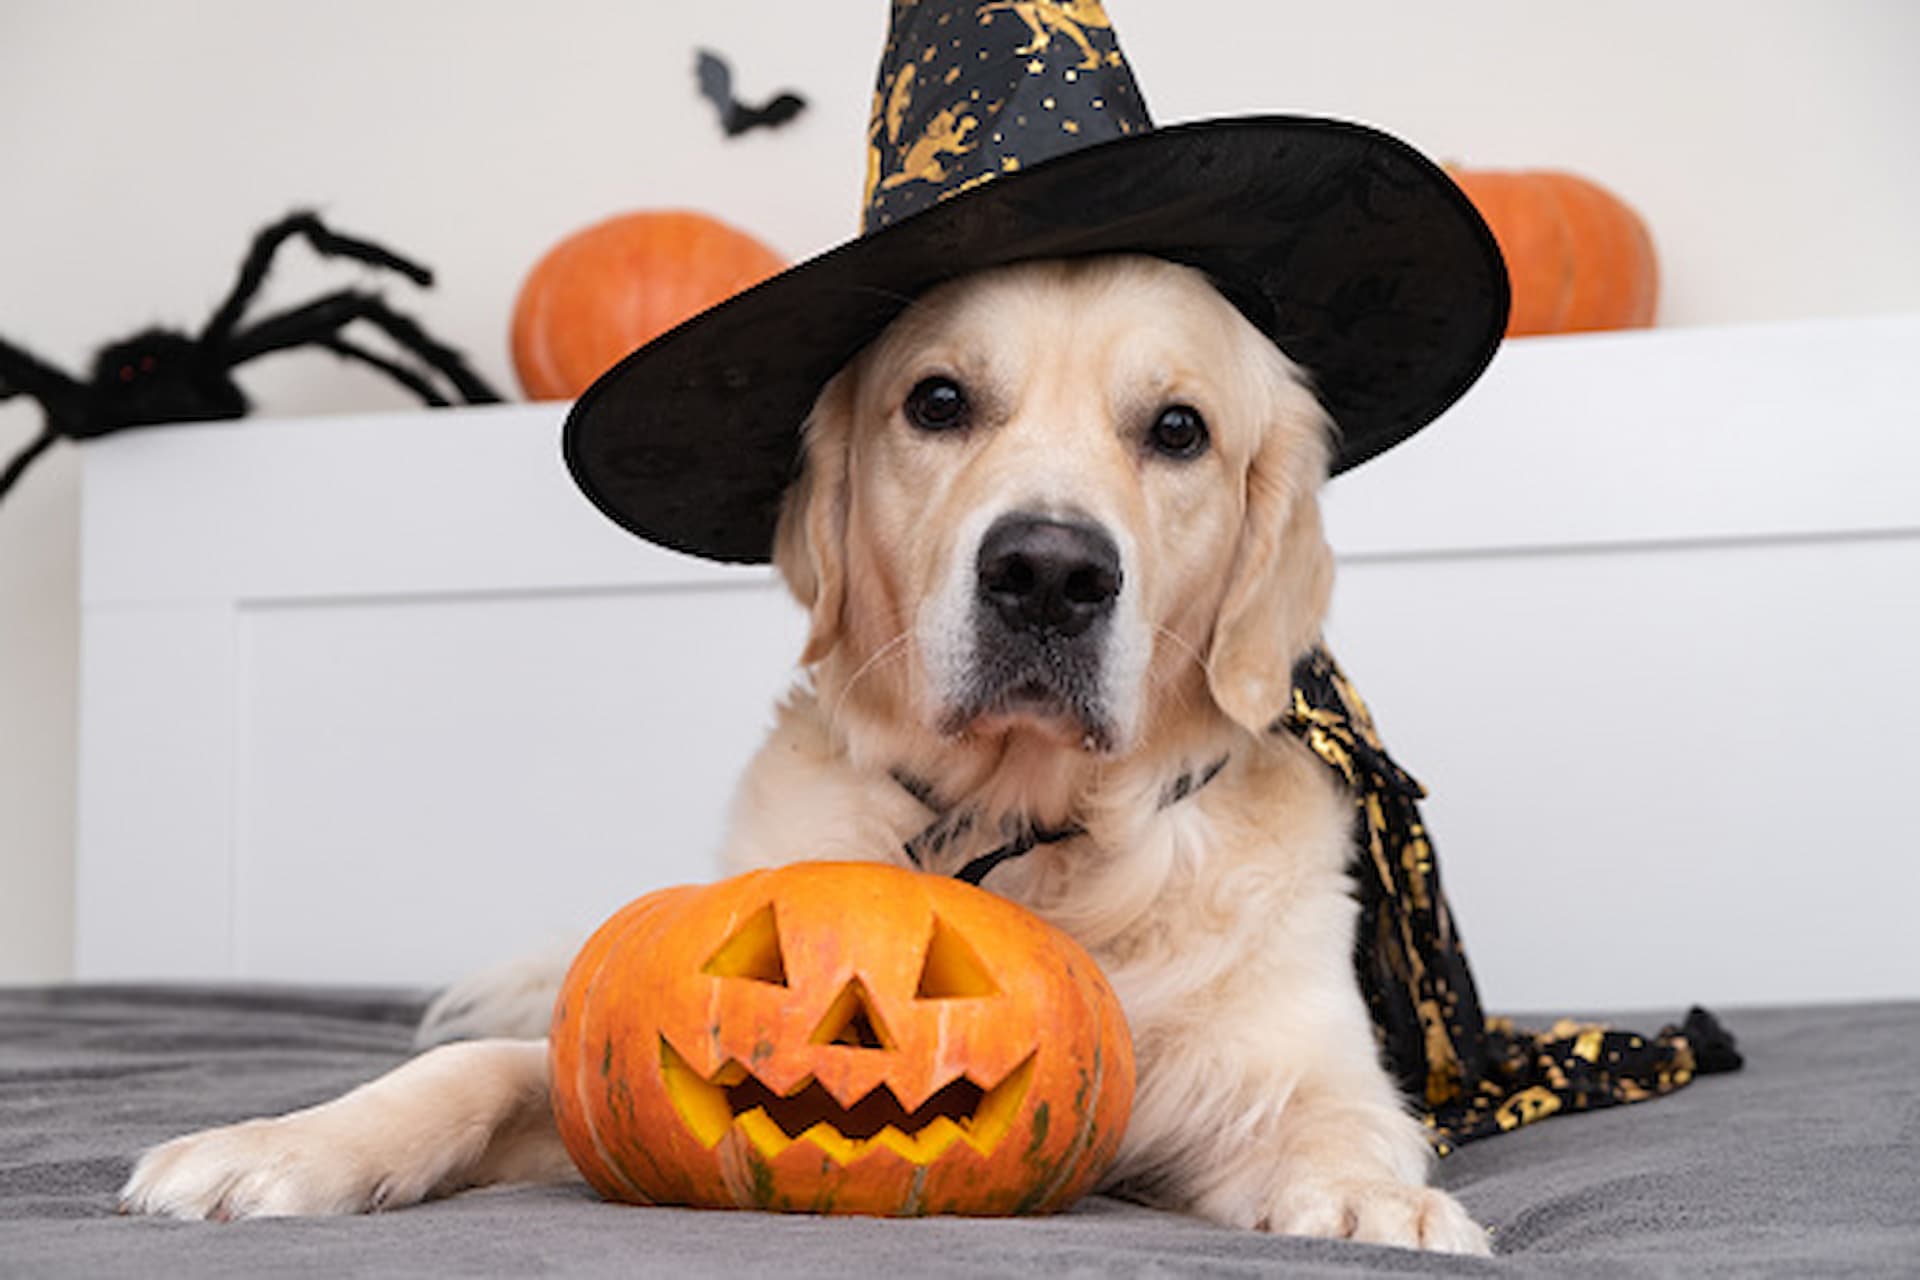 Halloween: How to Celebrate It With Your Dog